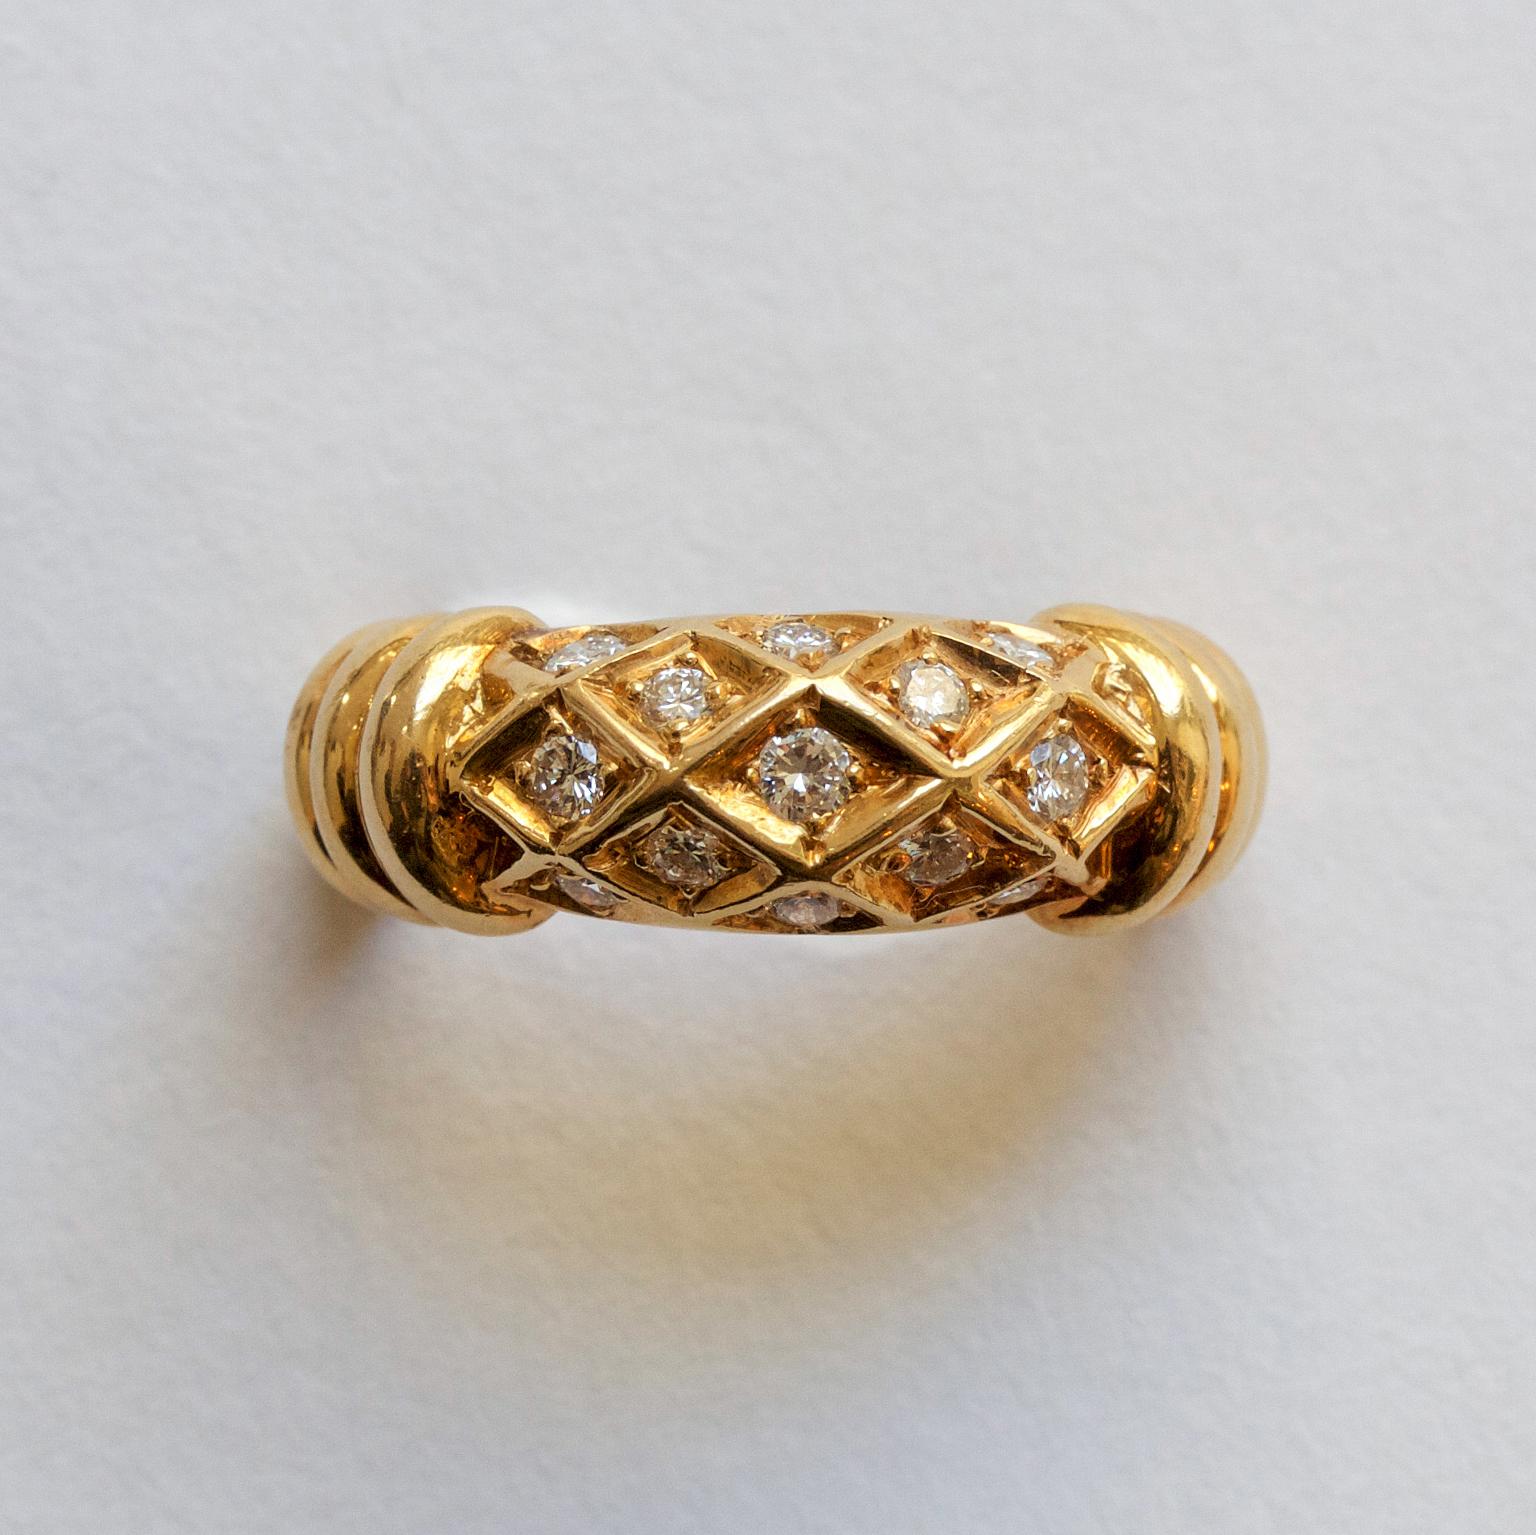 An 18 carat gold ring set with thirteen brilliant cut diamonds in kite shape with ribbed to the side of the shank, signed and numbered: 26810950. France, circa 1985.

weight: 7.2 grams
ring size: 15 ¼ / 4.5 US
width: 3.8 tot 7 mm